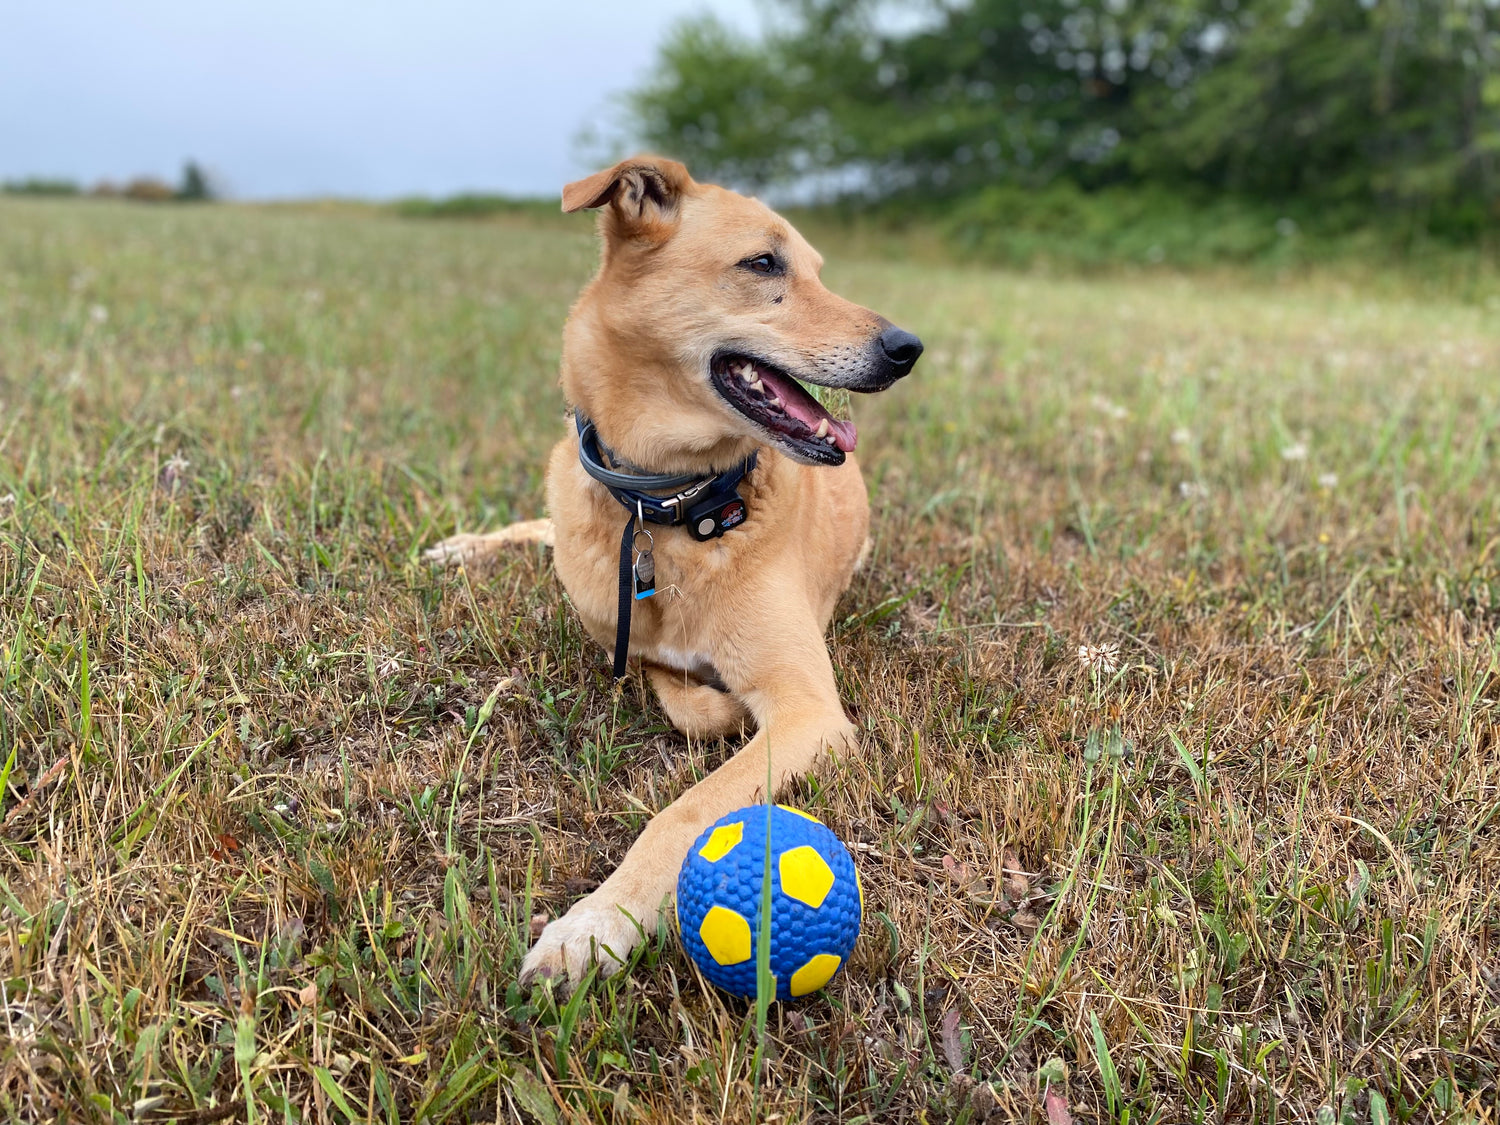 Ball Thief - the ultimate soccer ball for dogs